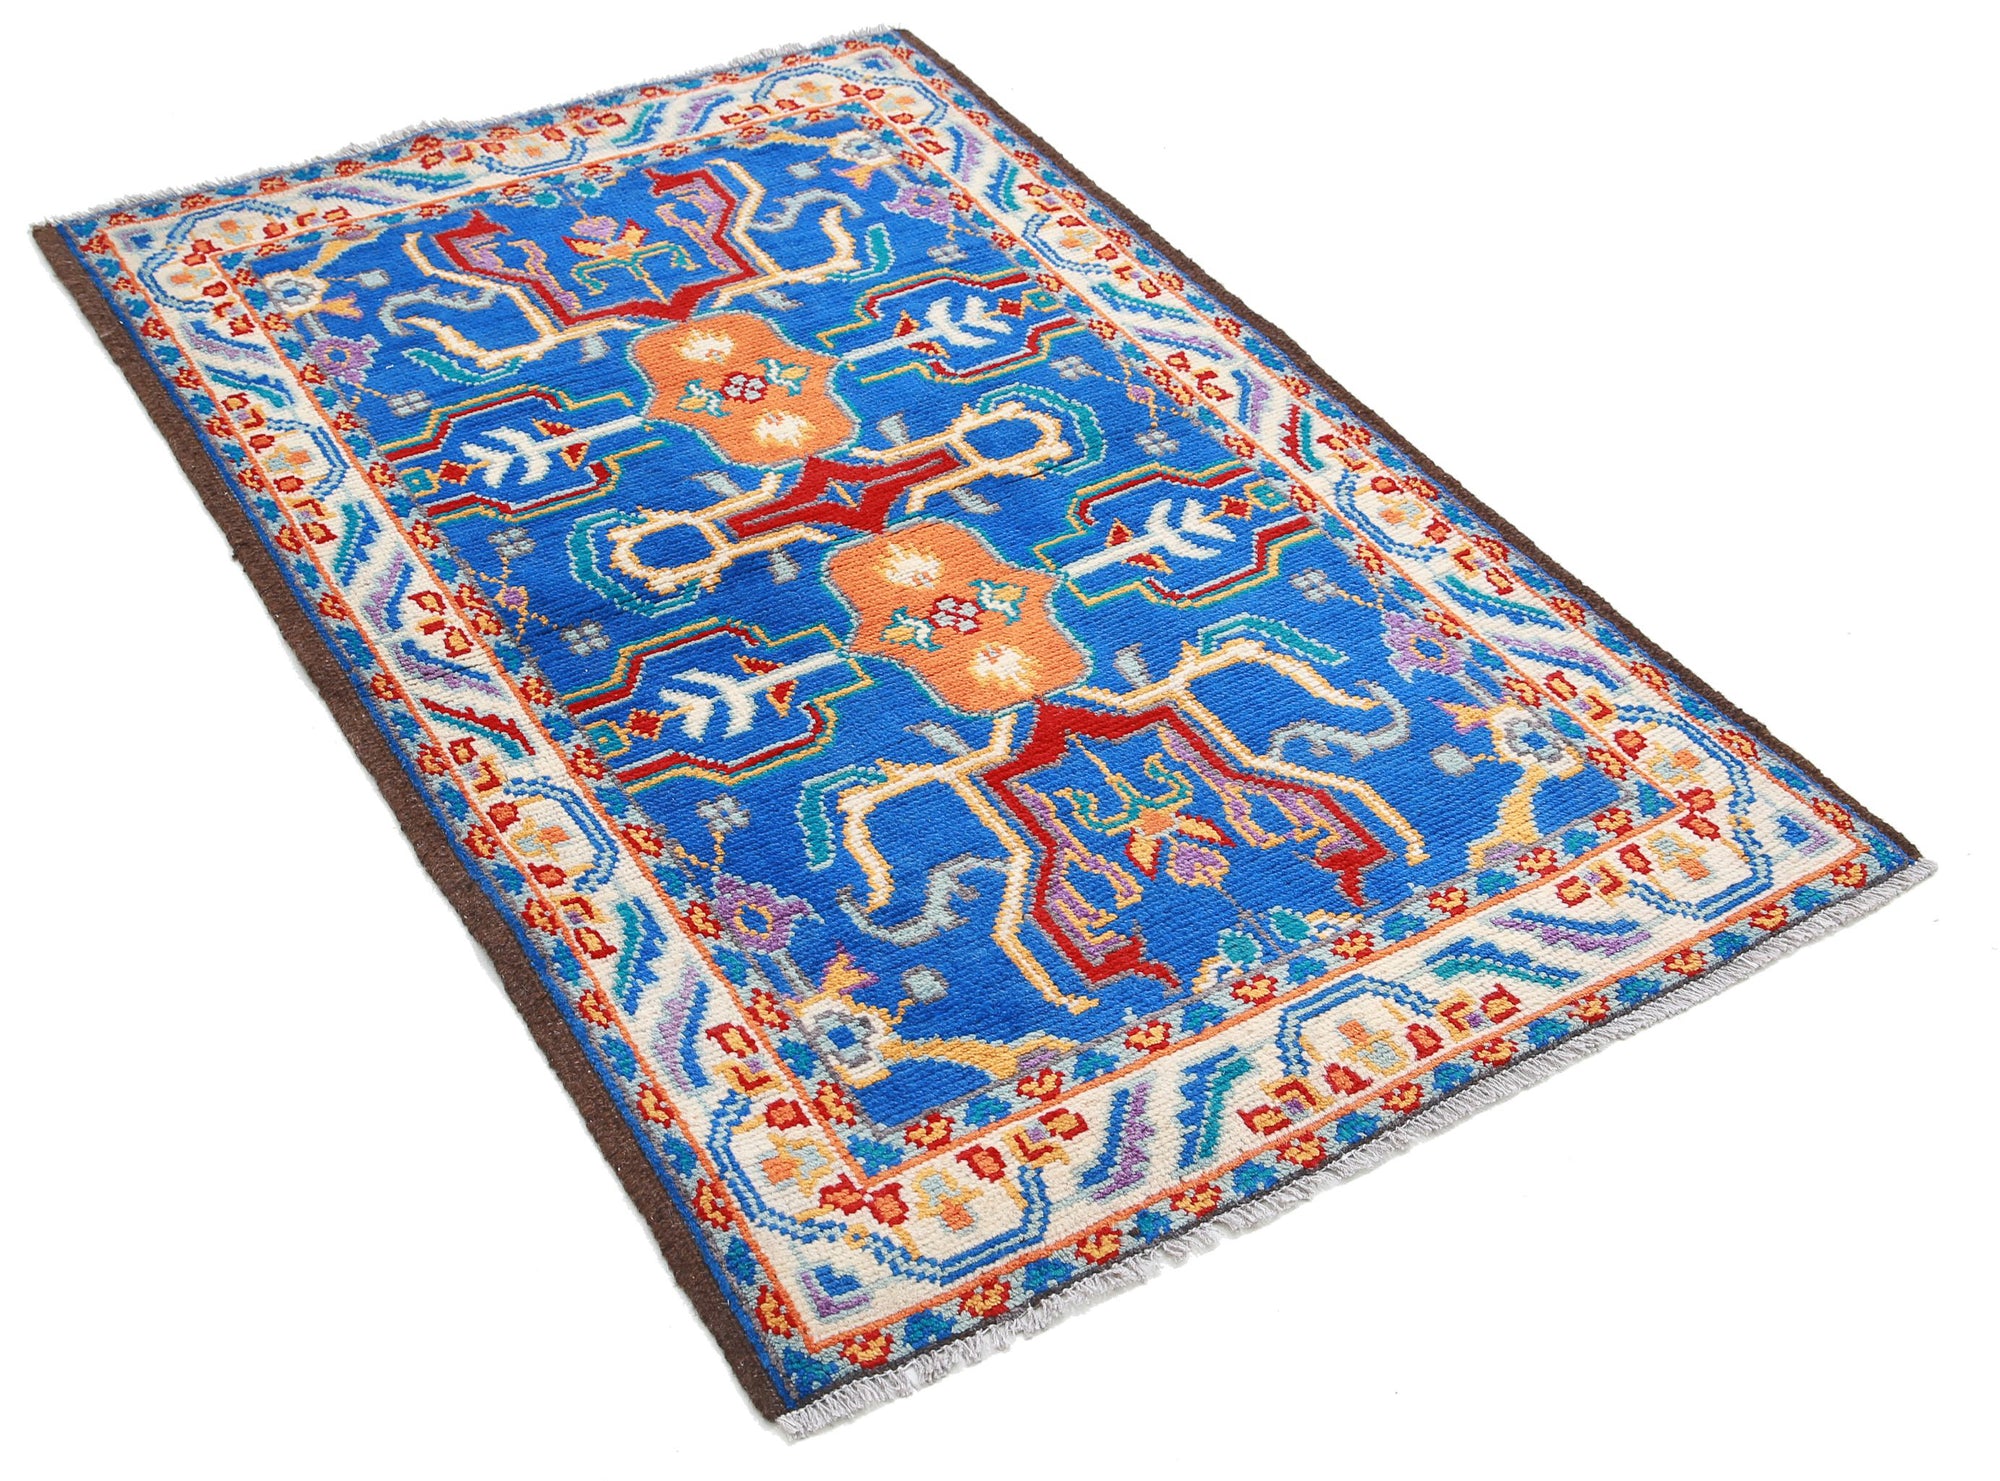 Revival-hand-knotted-qarghani-wool-rug-5014201-1.jpg